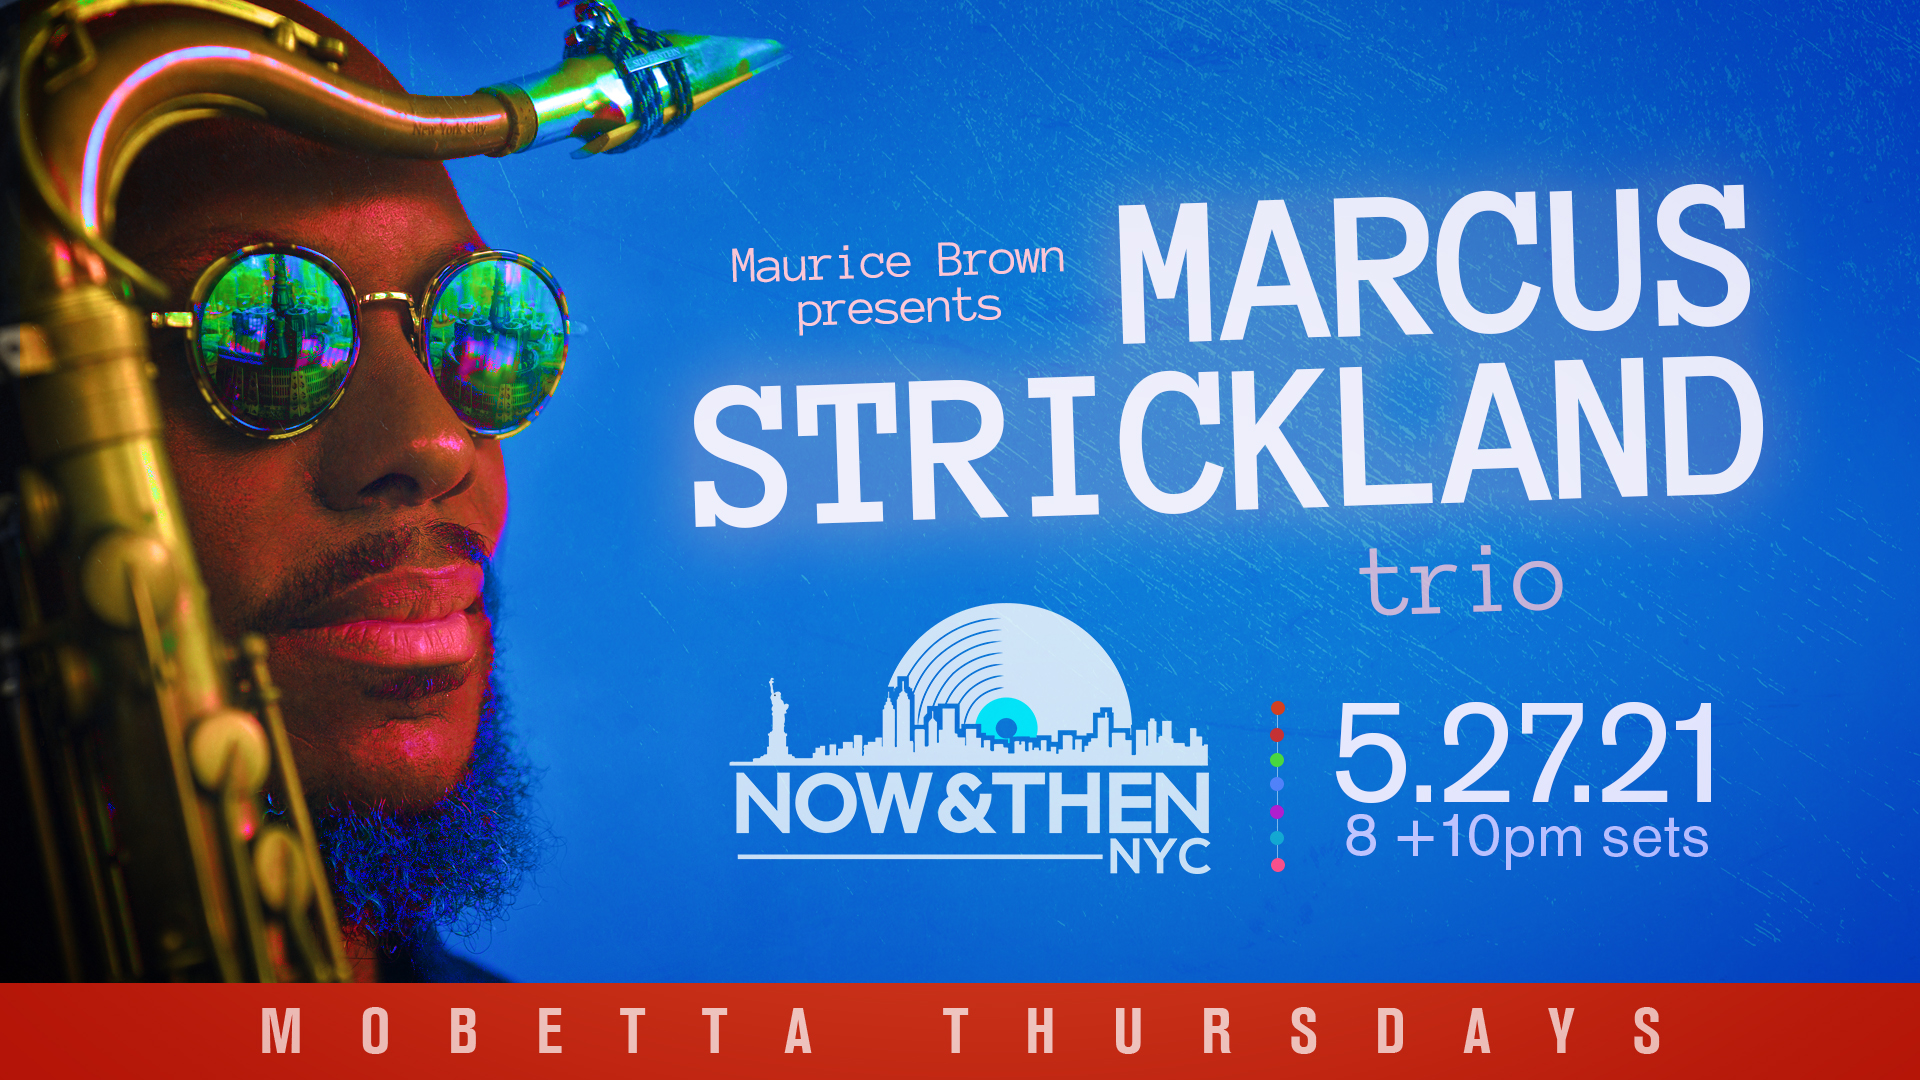 Photo for Mobetta Thursdays Curated By Maurice Brown Presents Marcus Strickland's Trio May 27th on ViewStub